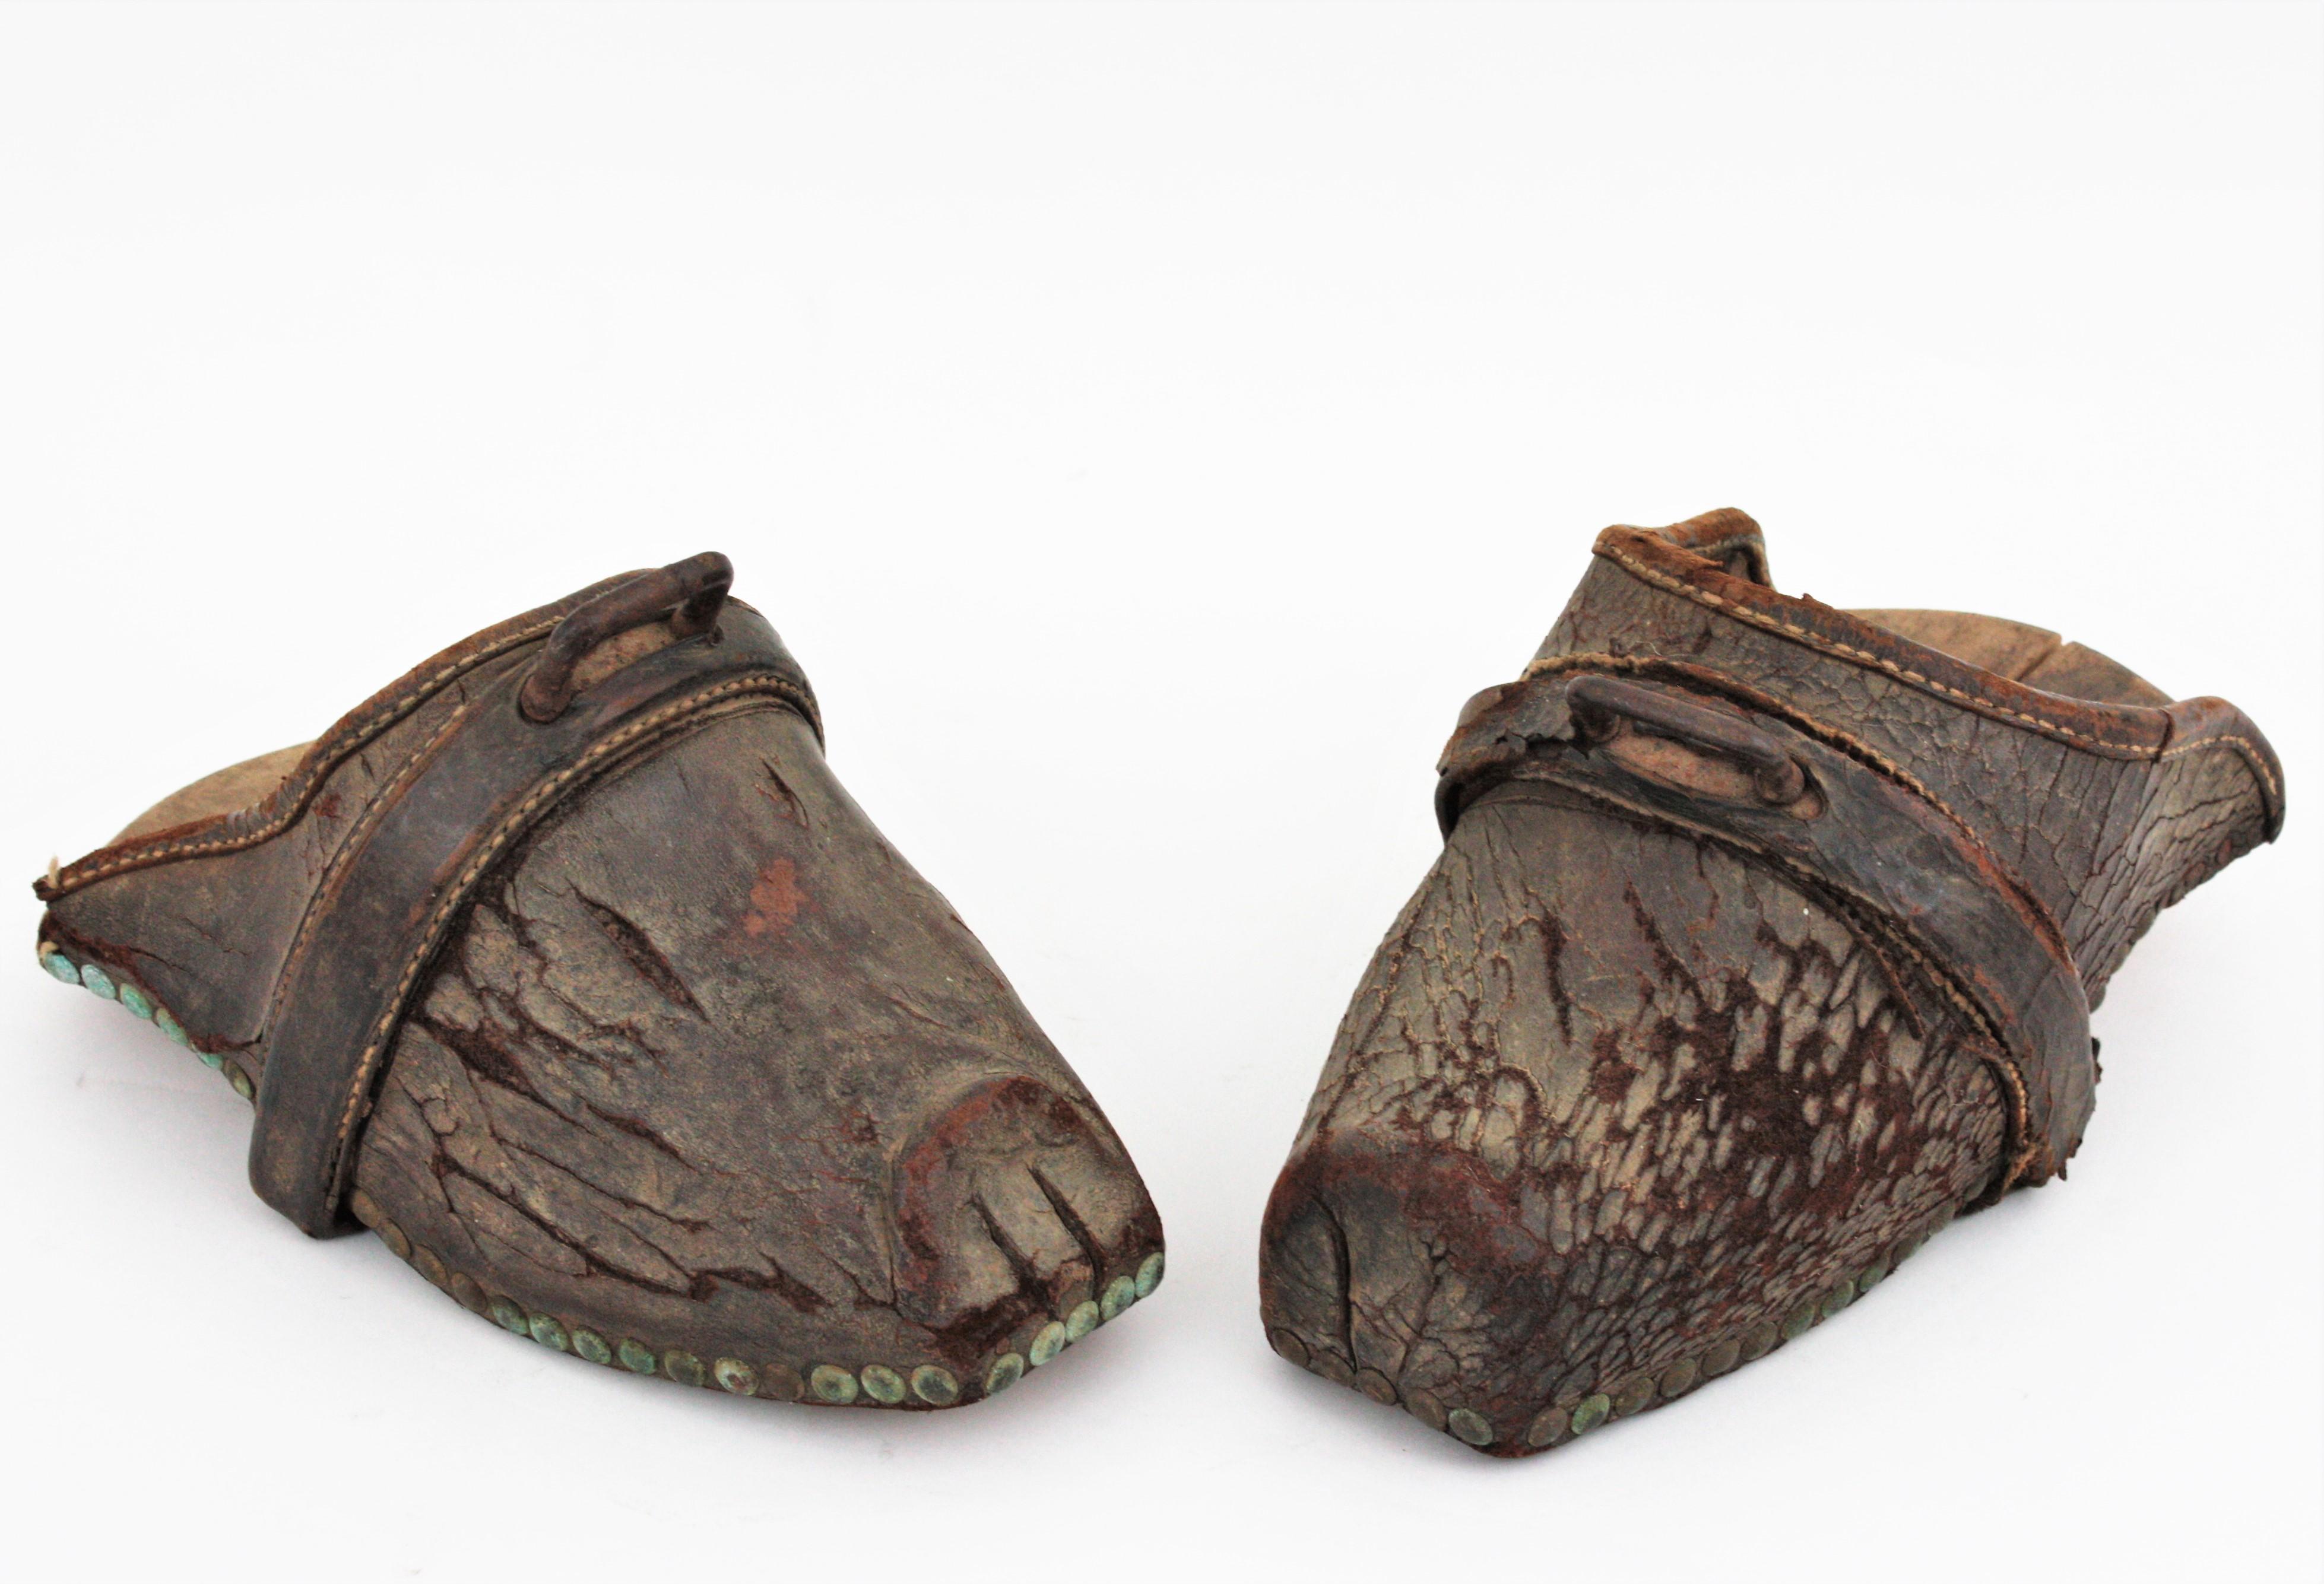 Clog Stirrups in Leather and Wood, Spain, 1930s-1940s.
Originally used for riding horses by spanish cattle herders
Interesting for decorative purposes.
Terrific aged patina.
Measures: 28,5 cm D x 13 cm W x 15 cm H.